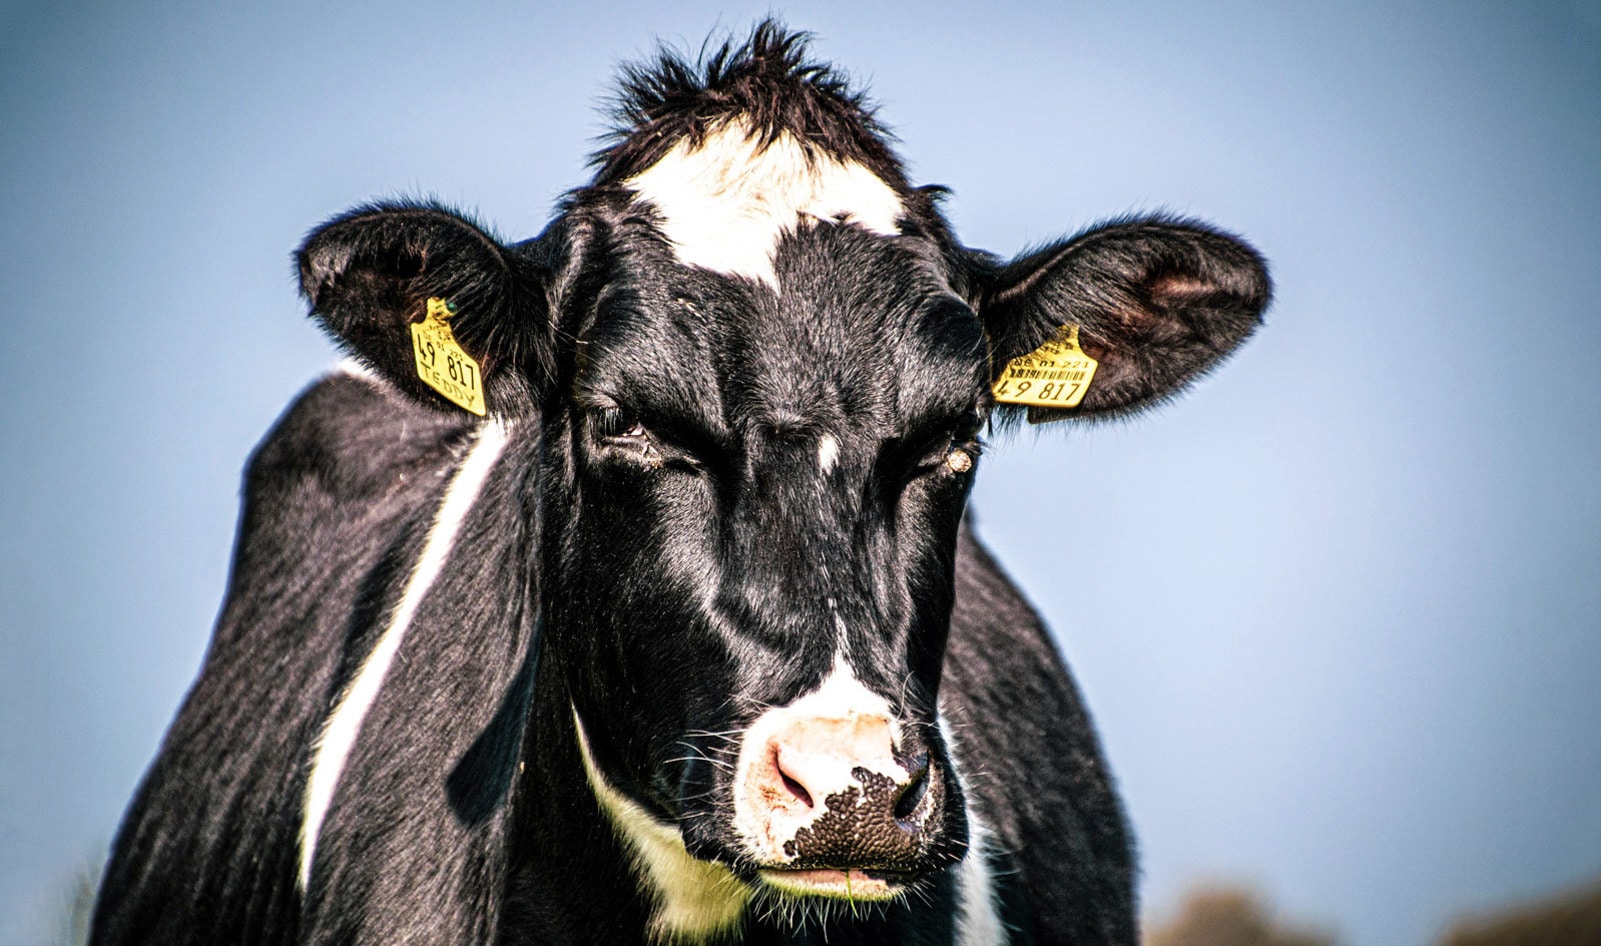 The Problem With Cloning 'Super Cows' to Increase Dairy Production